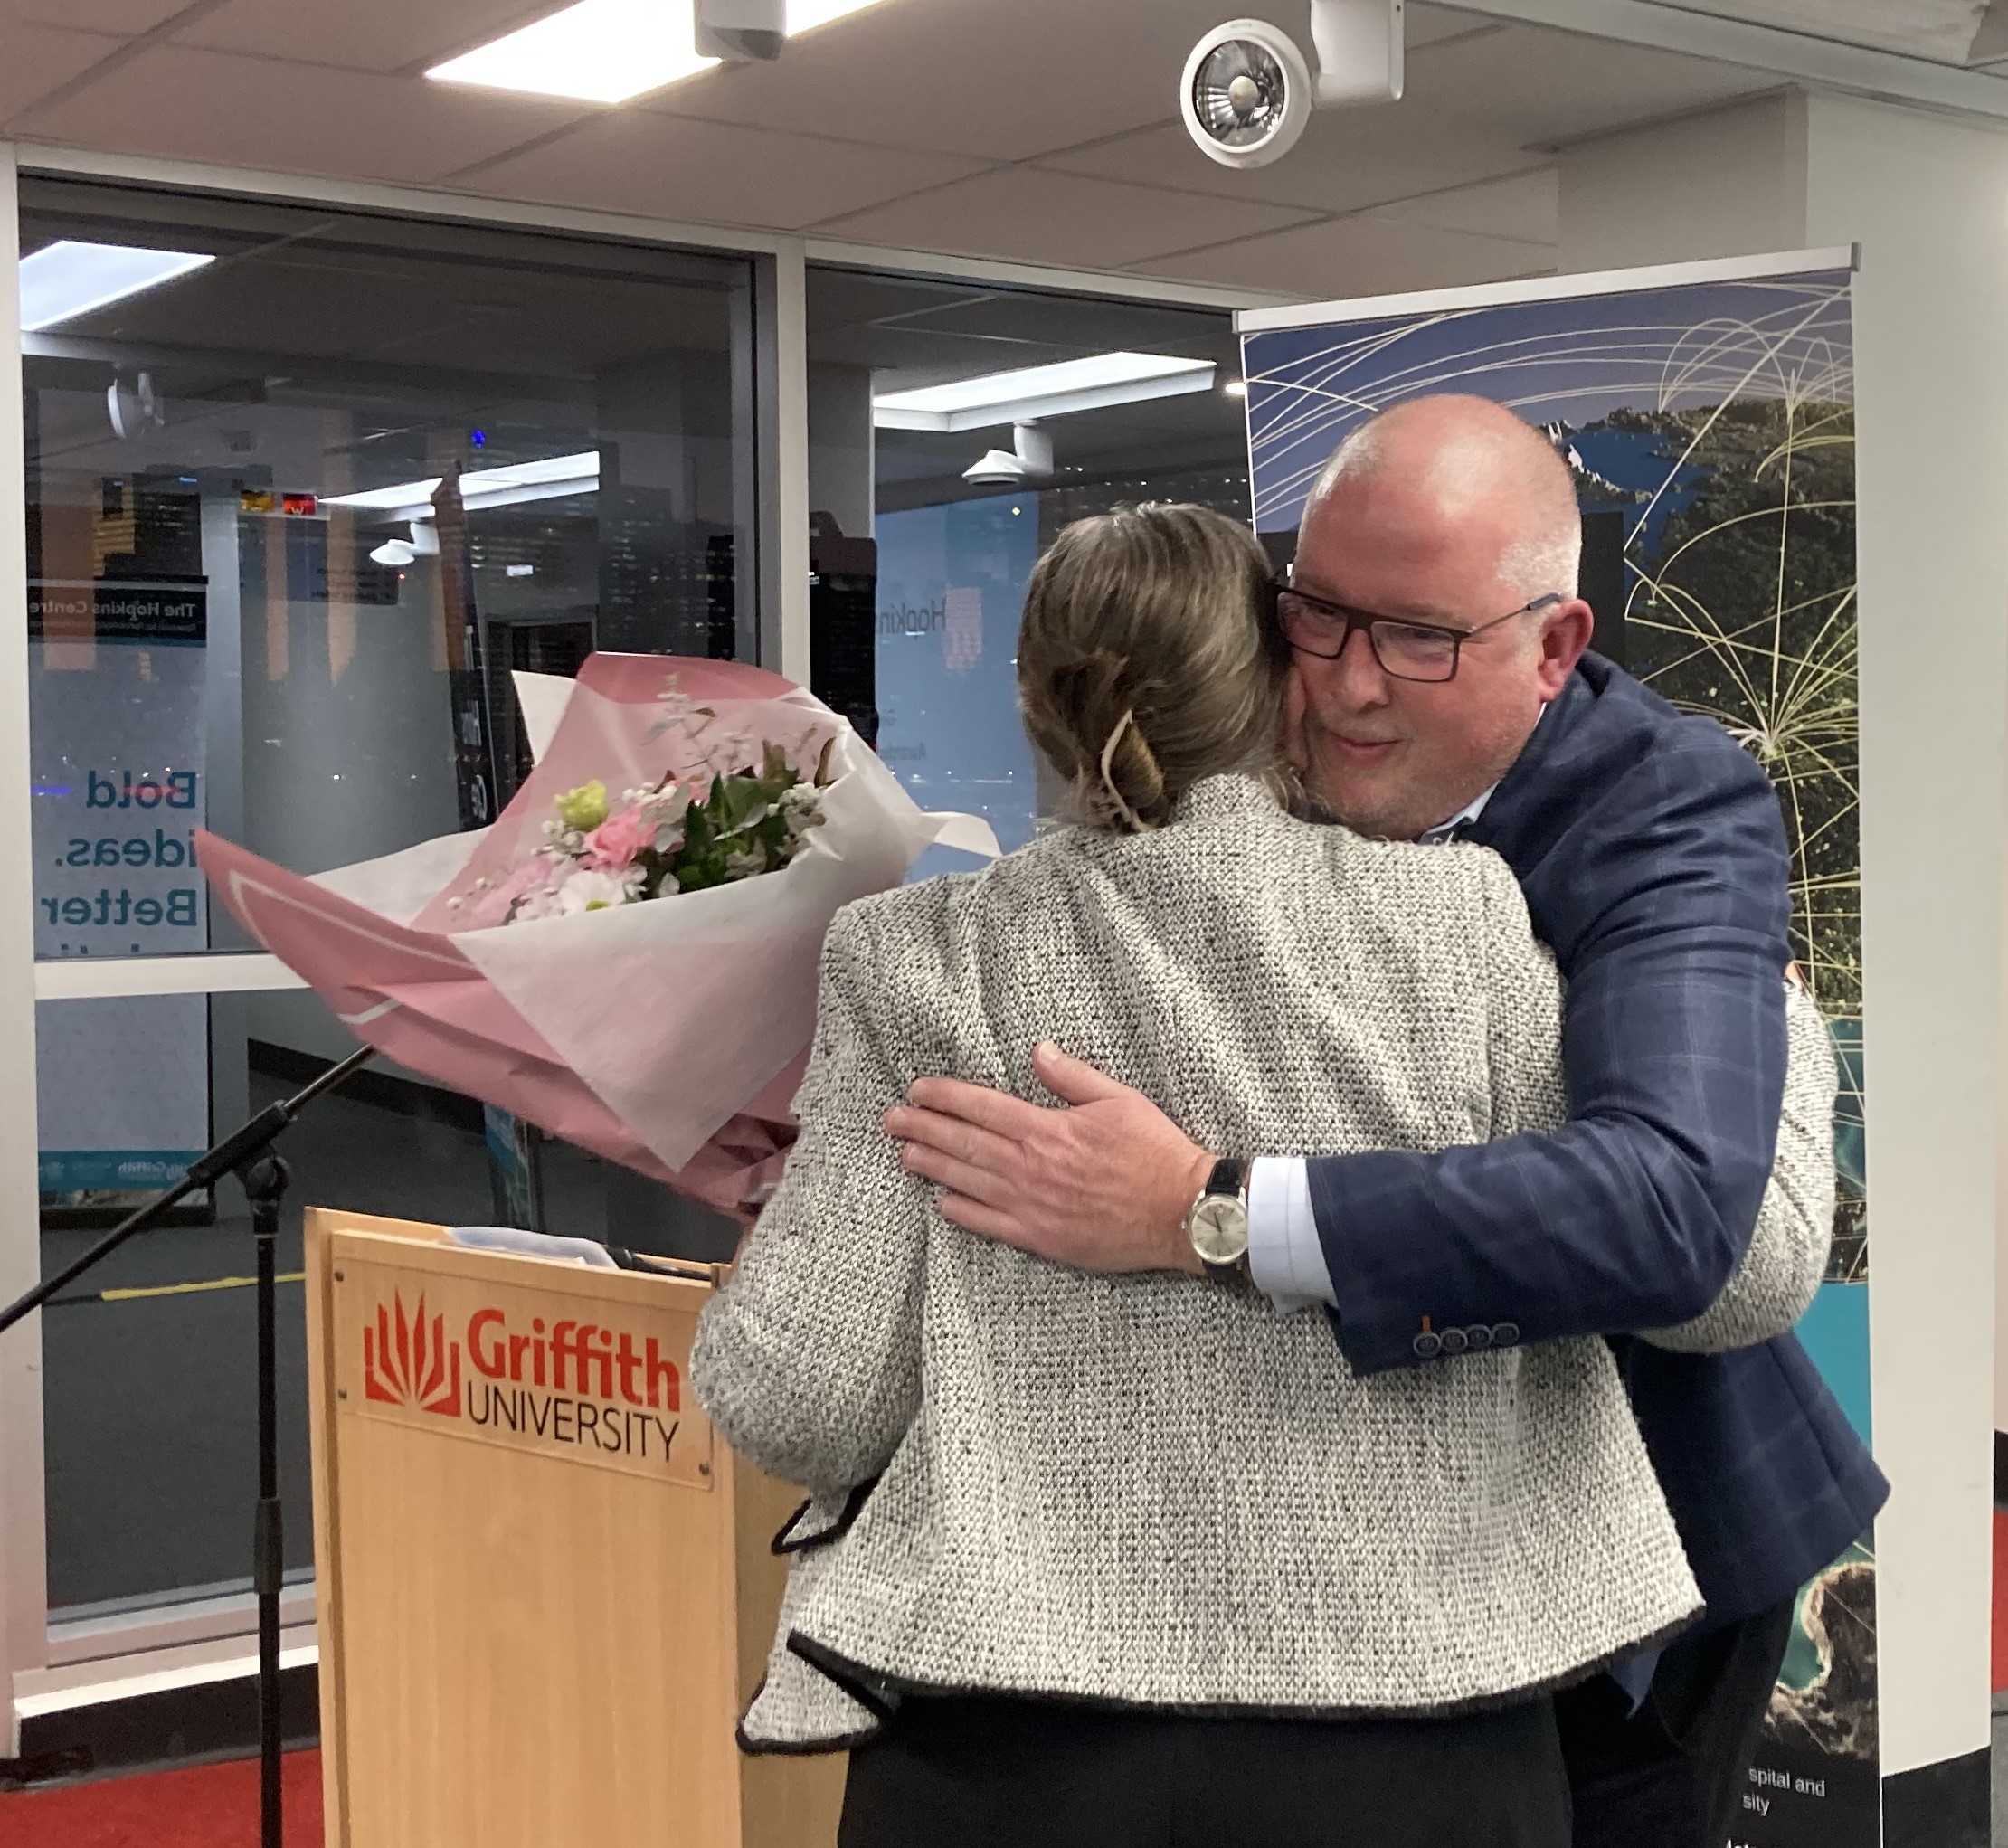 New Hopkins Centre Director, Prof. Tim Geraghty, a man with glasses wearing a blue suit jacket, and Prof. Elizabeth Kendall, a woman wearing a grey jacket with her hair clipped up, hugging as Prof Geraghty presents Prof. Kendall with a pink bunch of flowers.